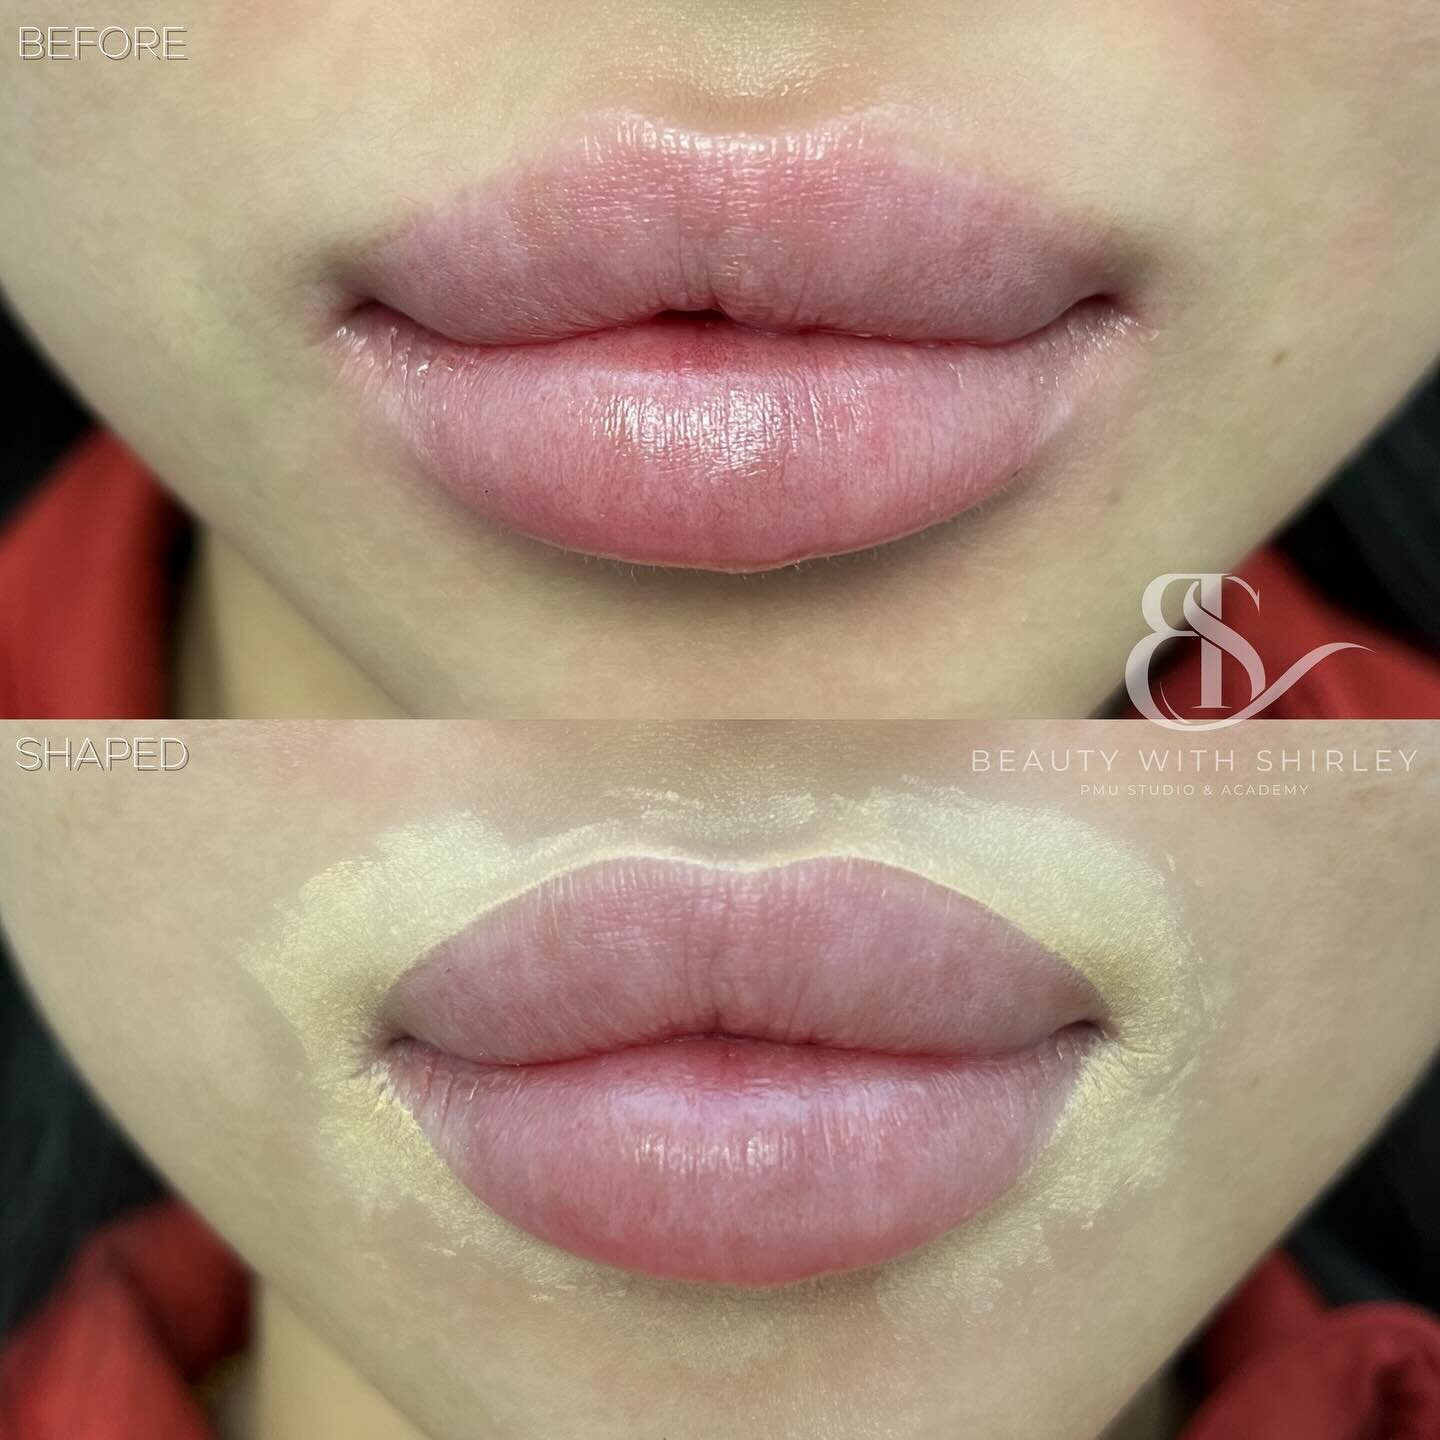 Her lips but BETTER. Defining her lip shape again as she has a loss of colour on the borders of her lip.

This can happen over time with age, fillers, your lifestyle, etc.

Lip blush helps restore the colour loss, enhance symmetry, and create a youth